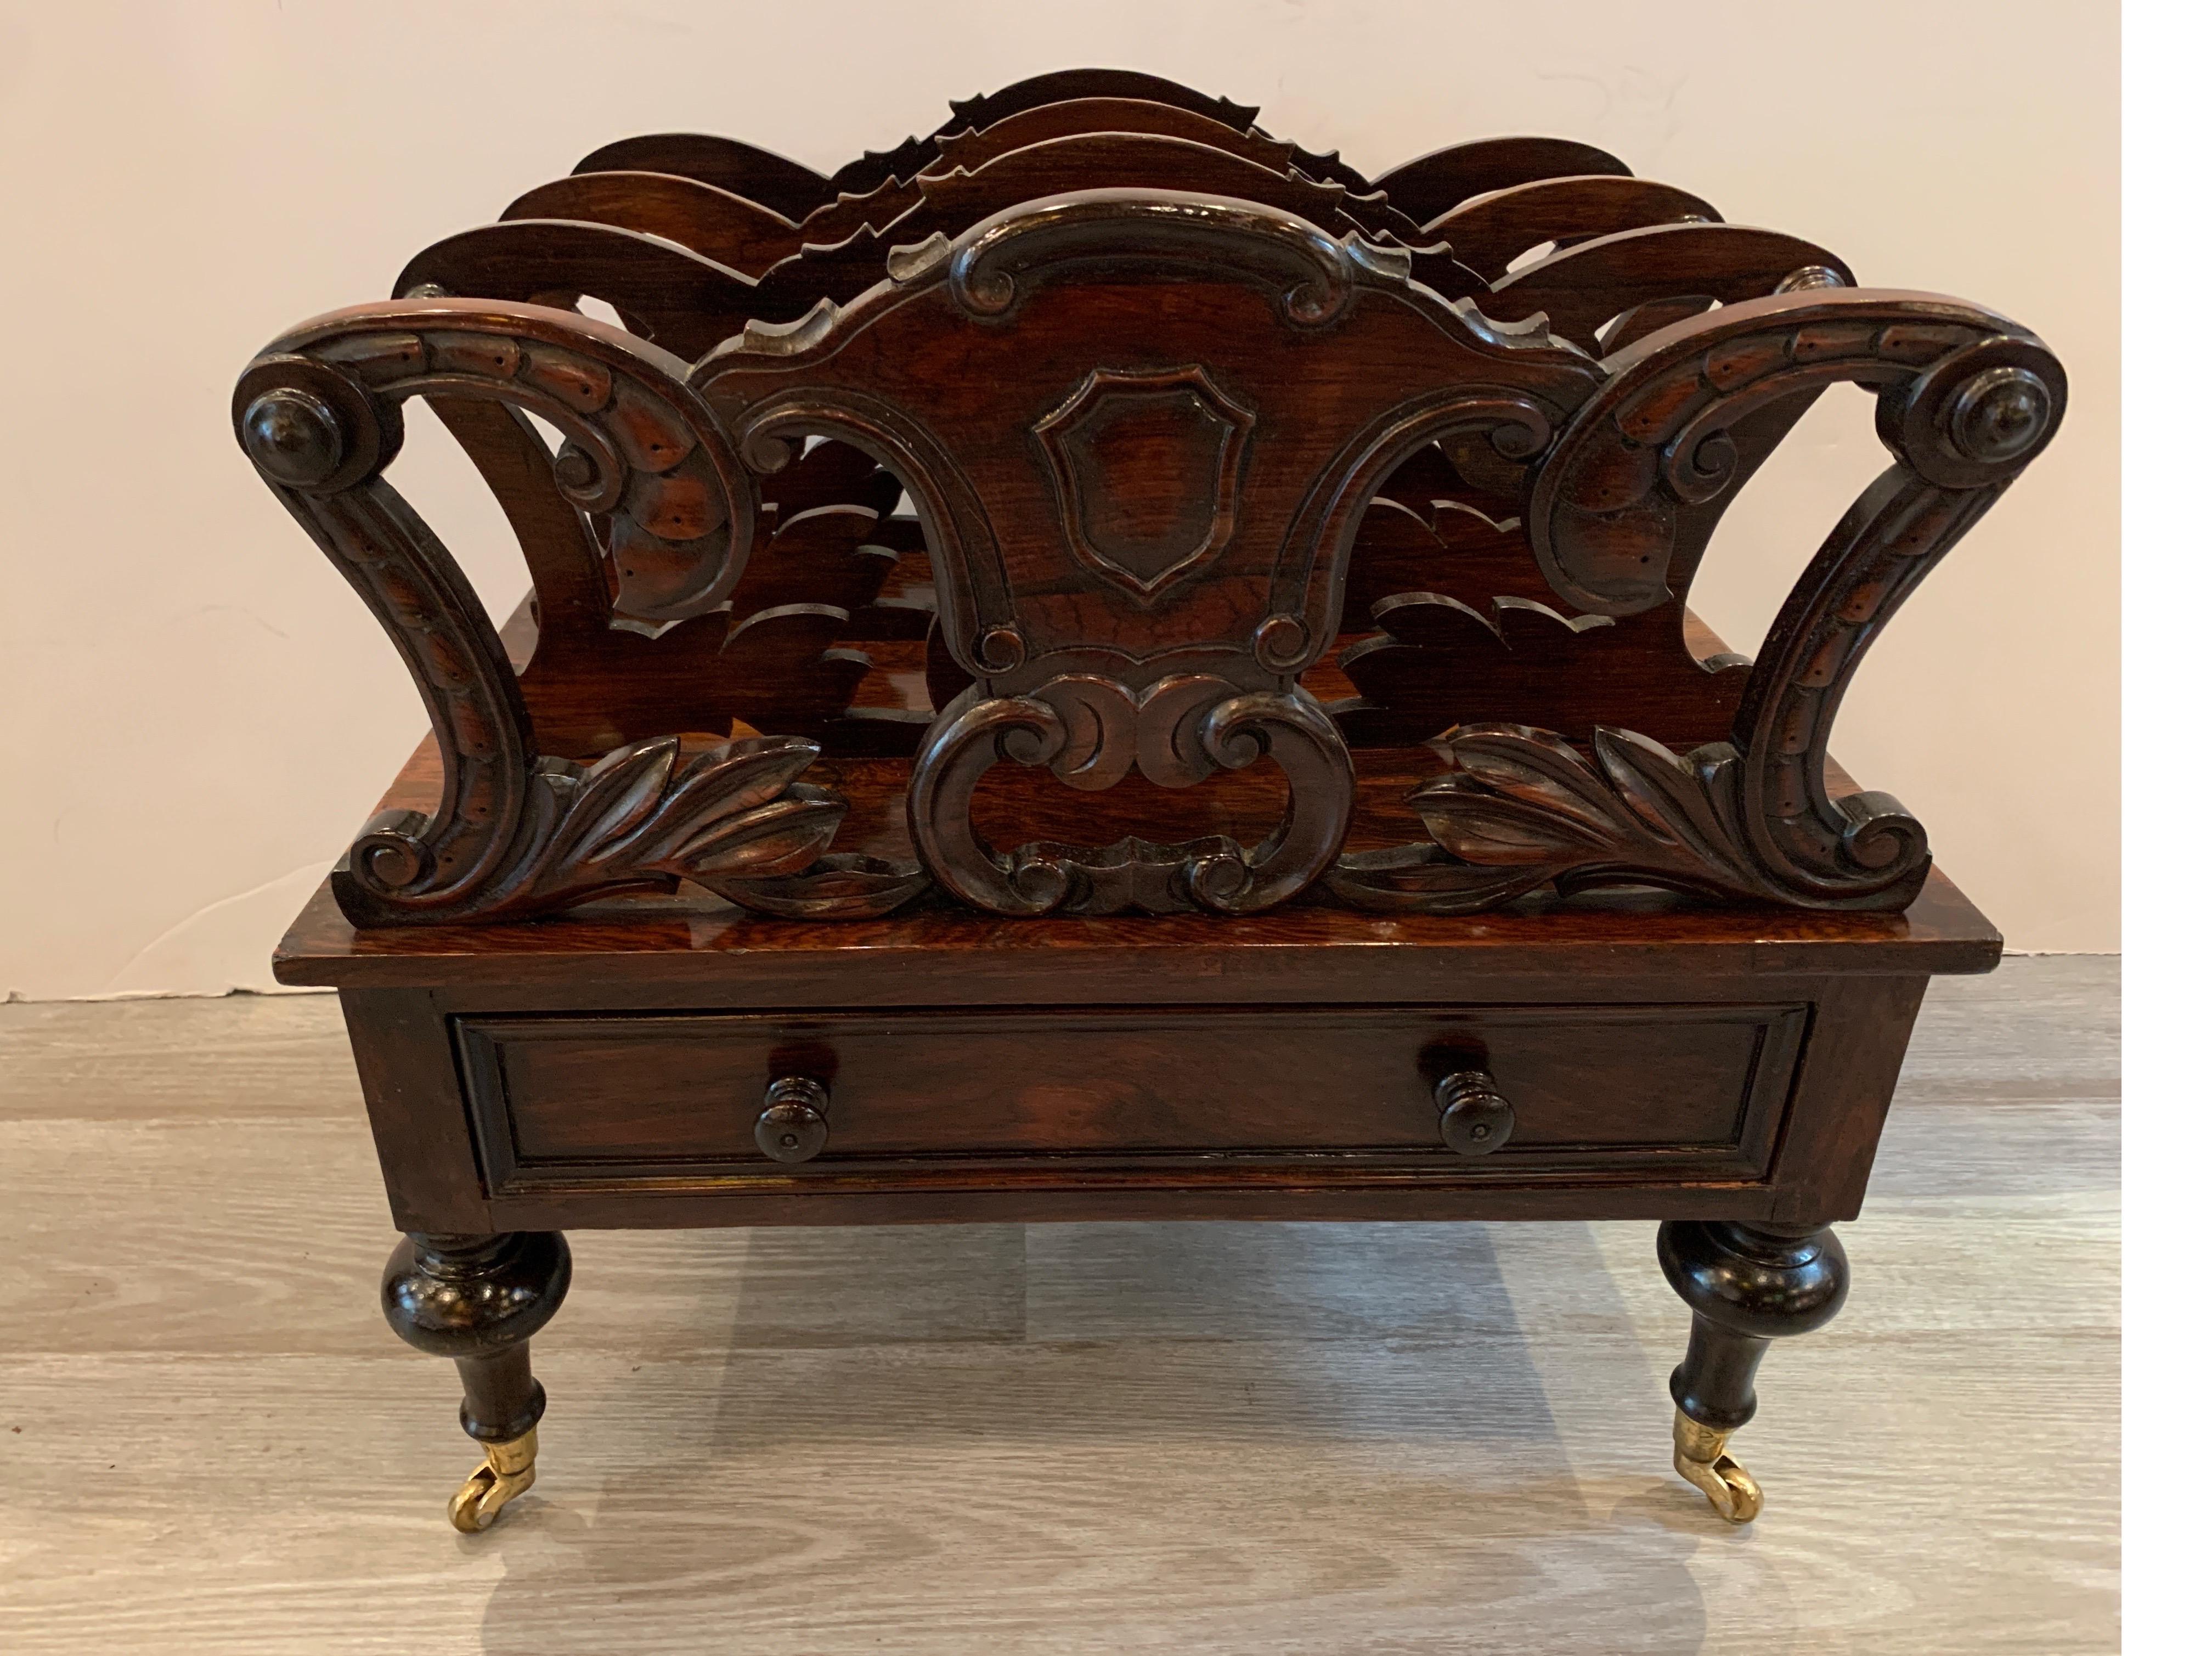 Early Victorian solid rosewood three-section Canterbury with drawer and casters, circa 1850-1860
Nicely carved design throughout the piece and turned handled sides. Quality brass casters.
From a private estate.
Dimensions: 20.25